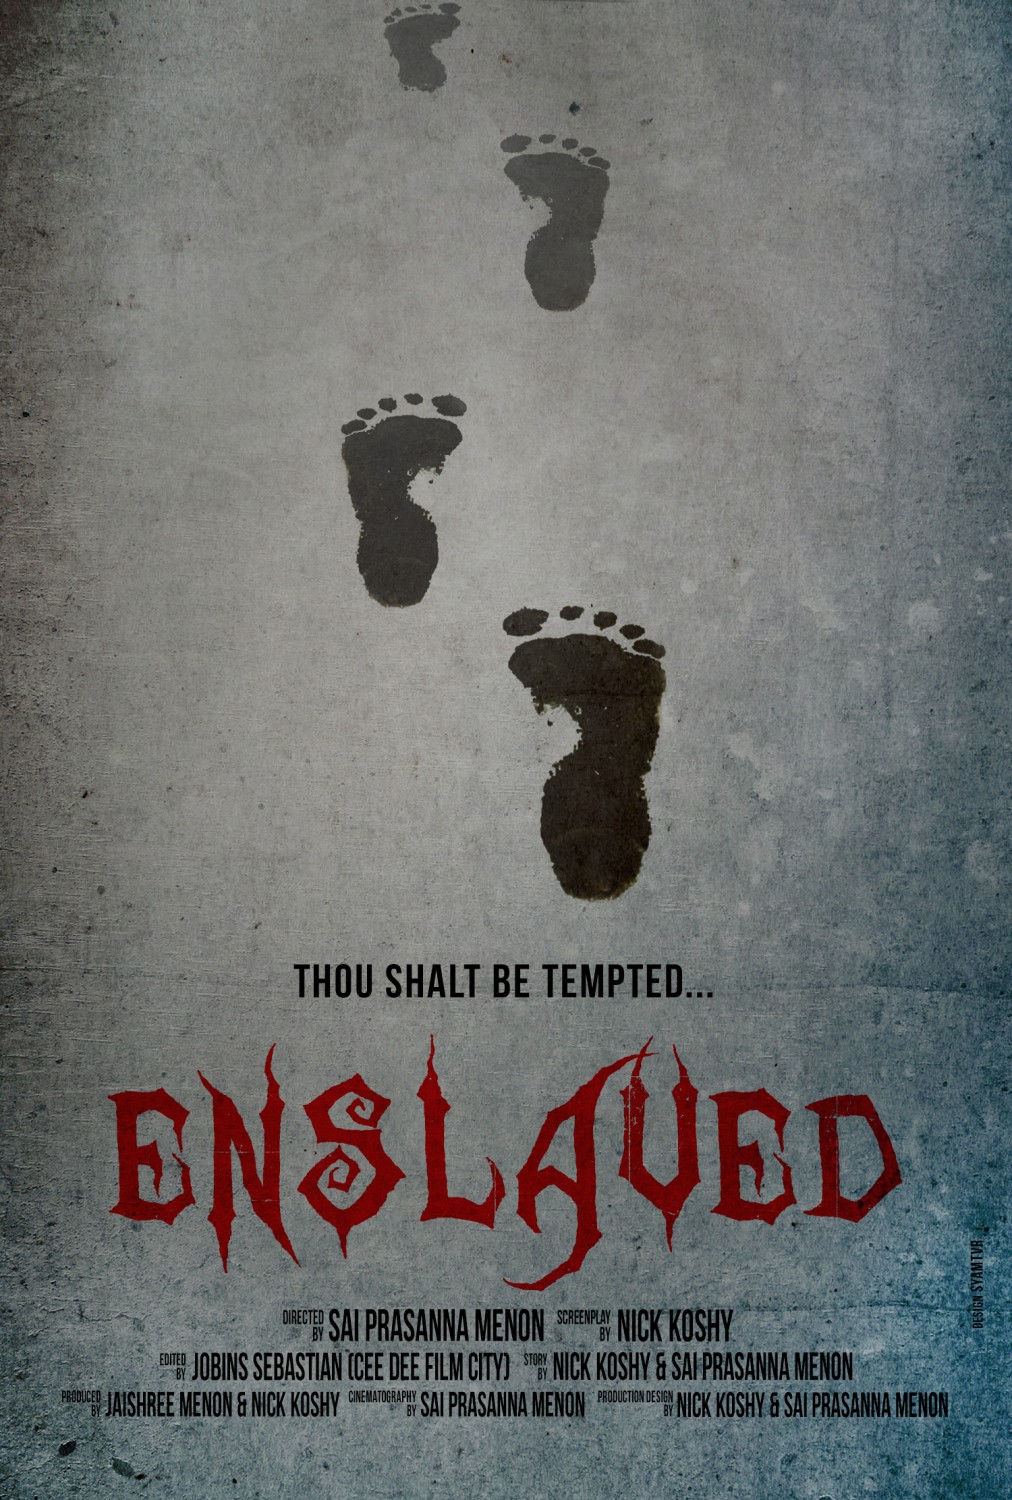 Extra Large Movie Poster Image for Enslaved